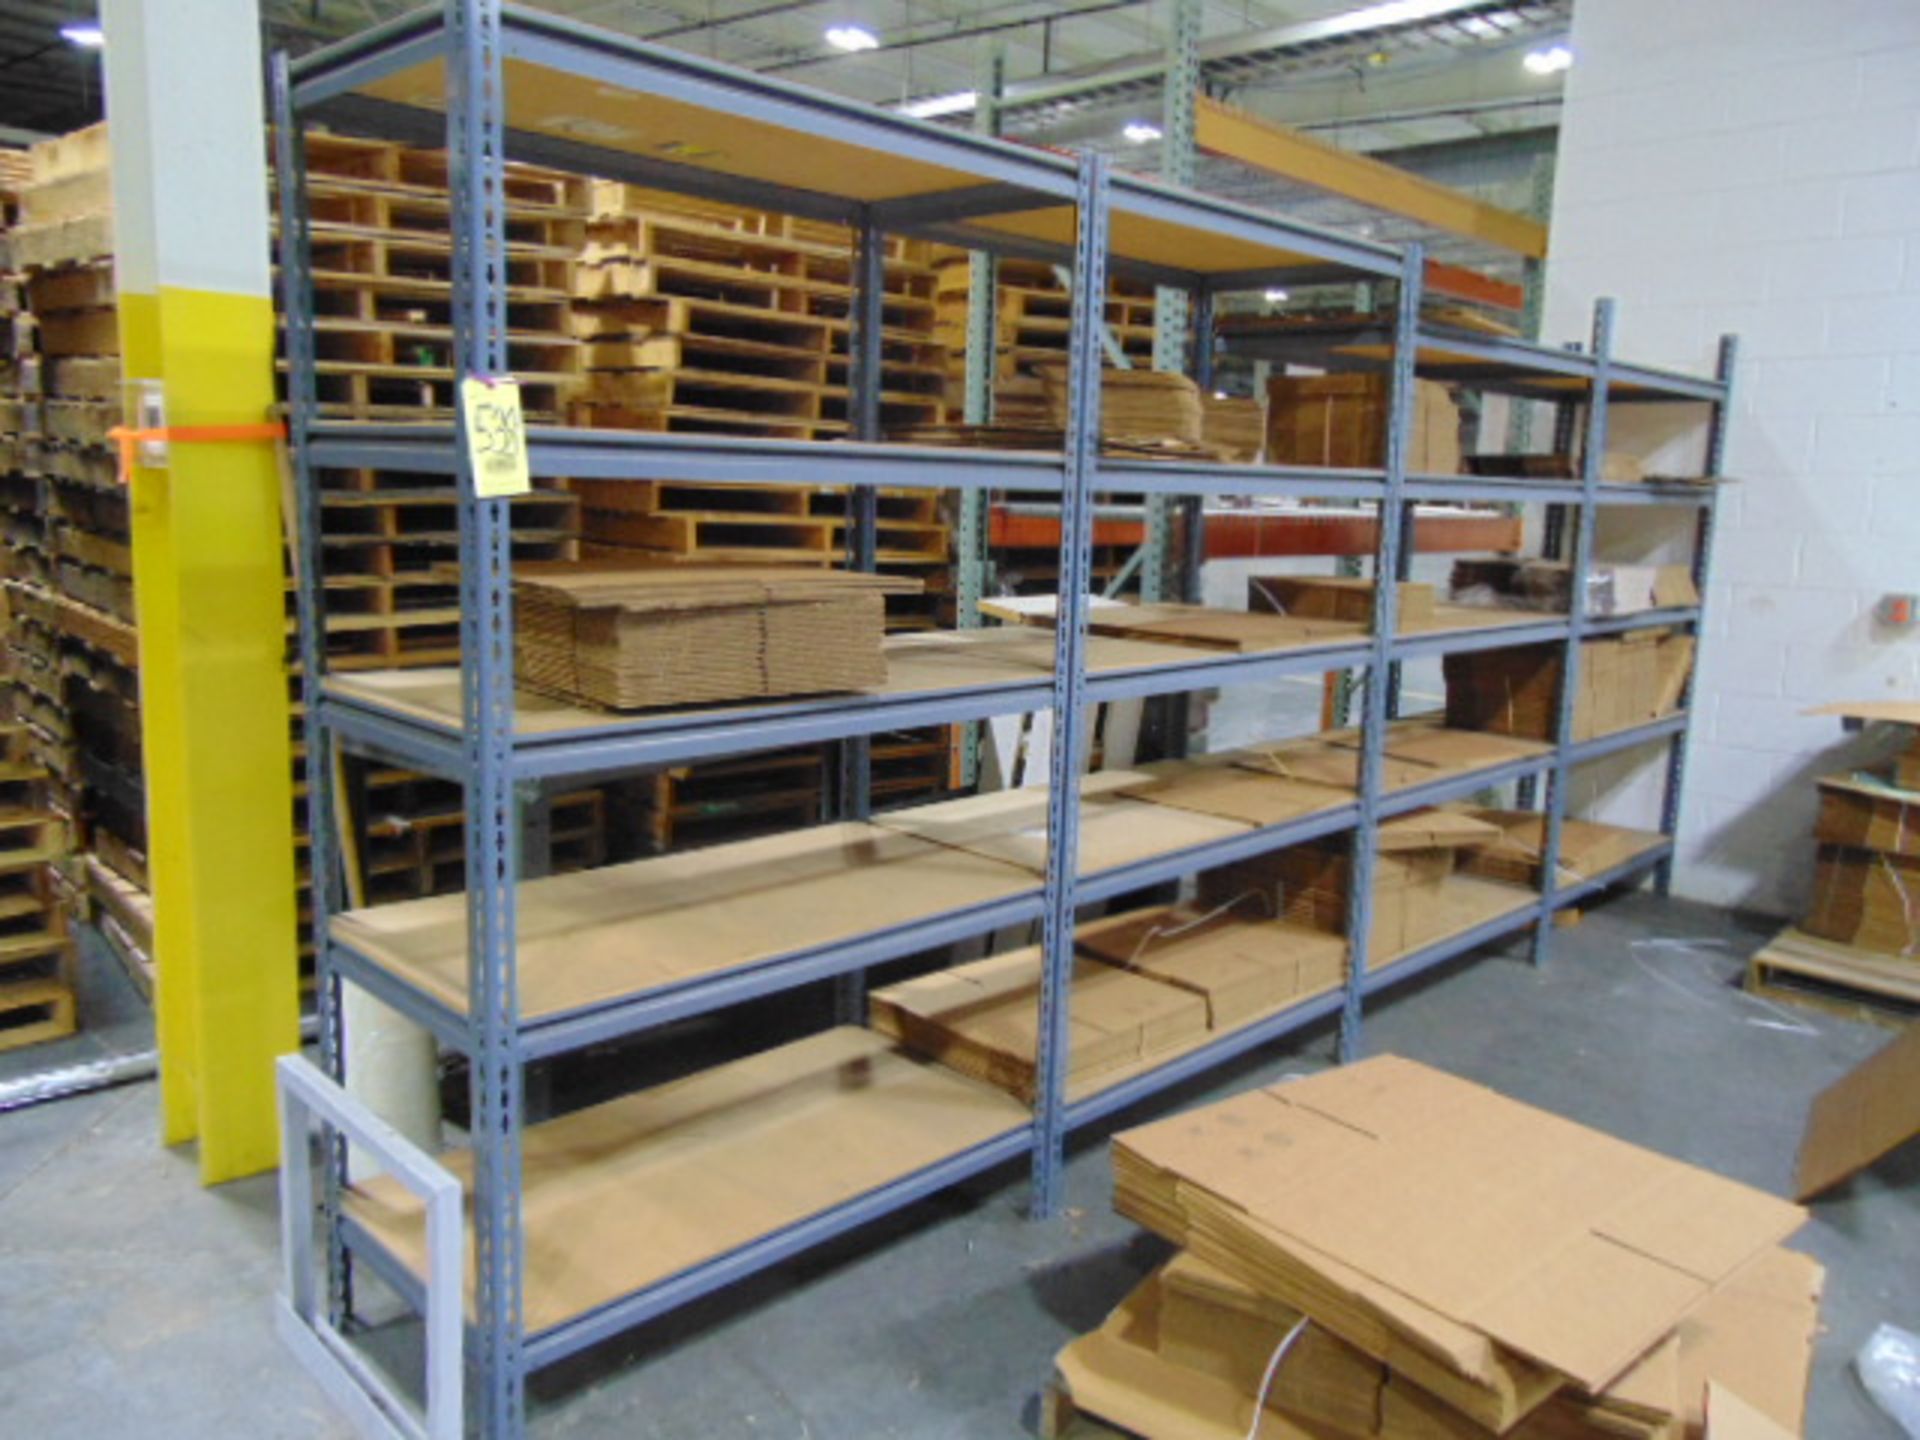 LOT OF ADJUSTABLE STEEL SHELVING SECTIONS (4), 84"ht x 48"W. x 24"dp. (Located at: 401 Stephen